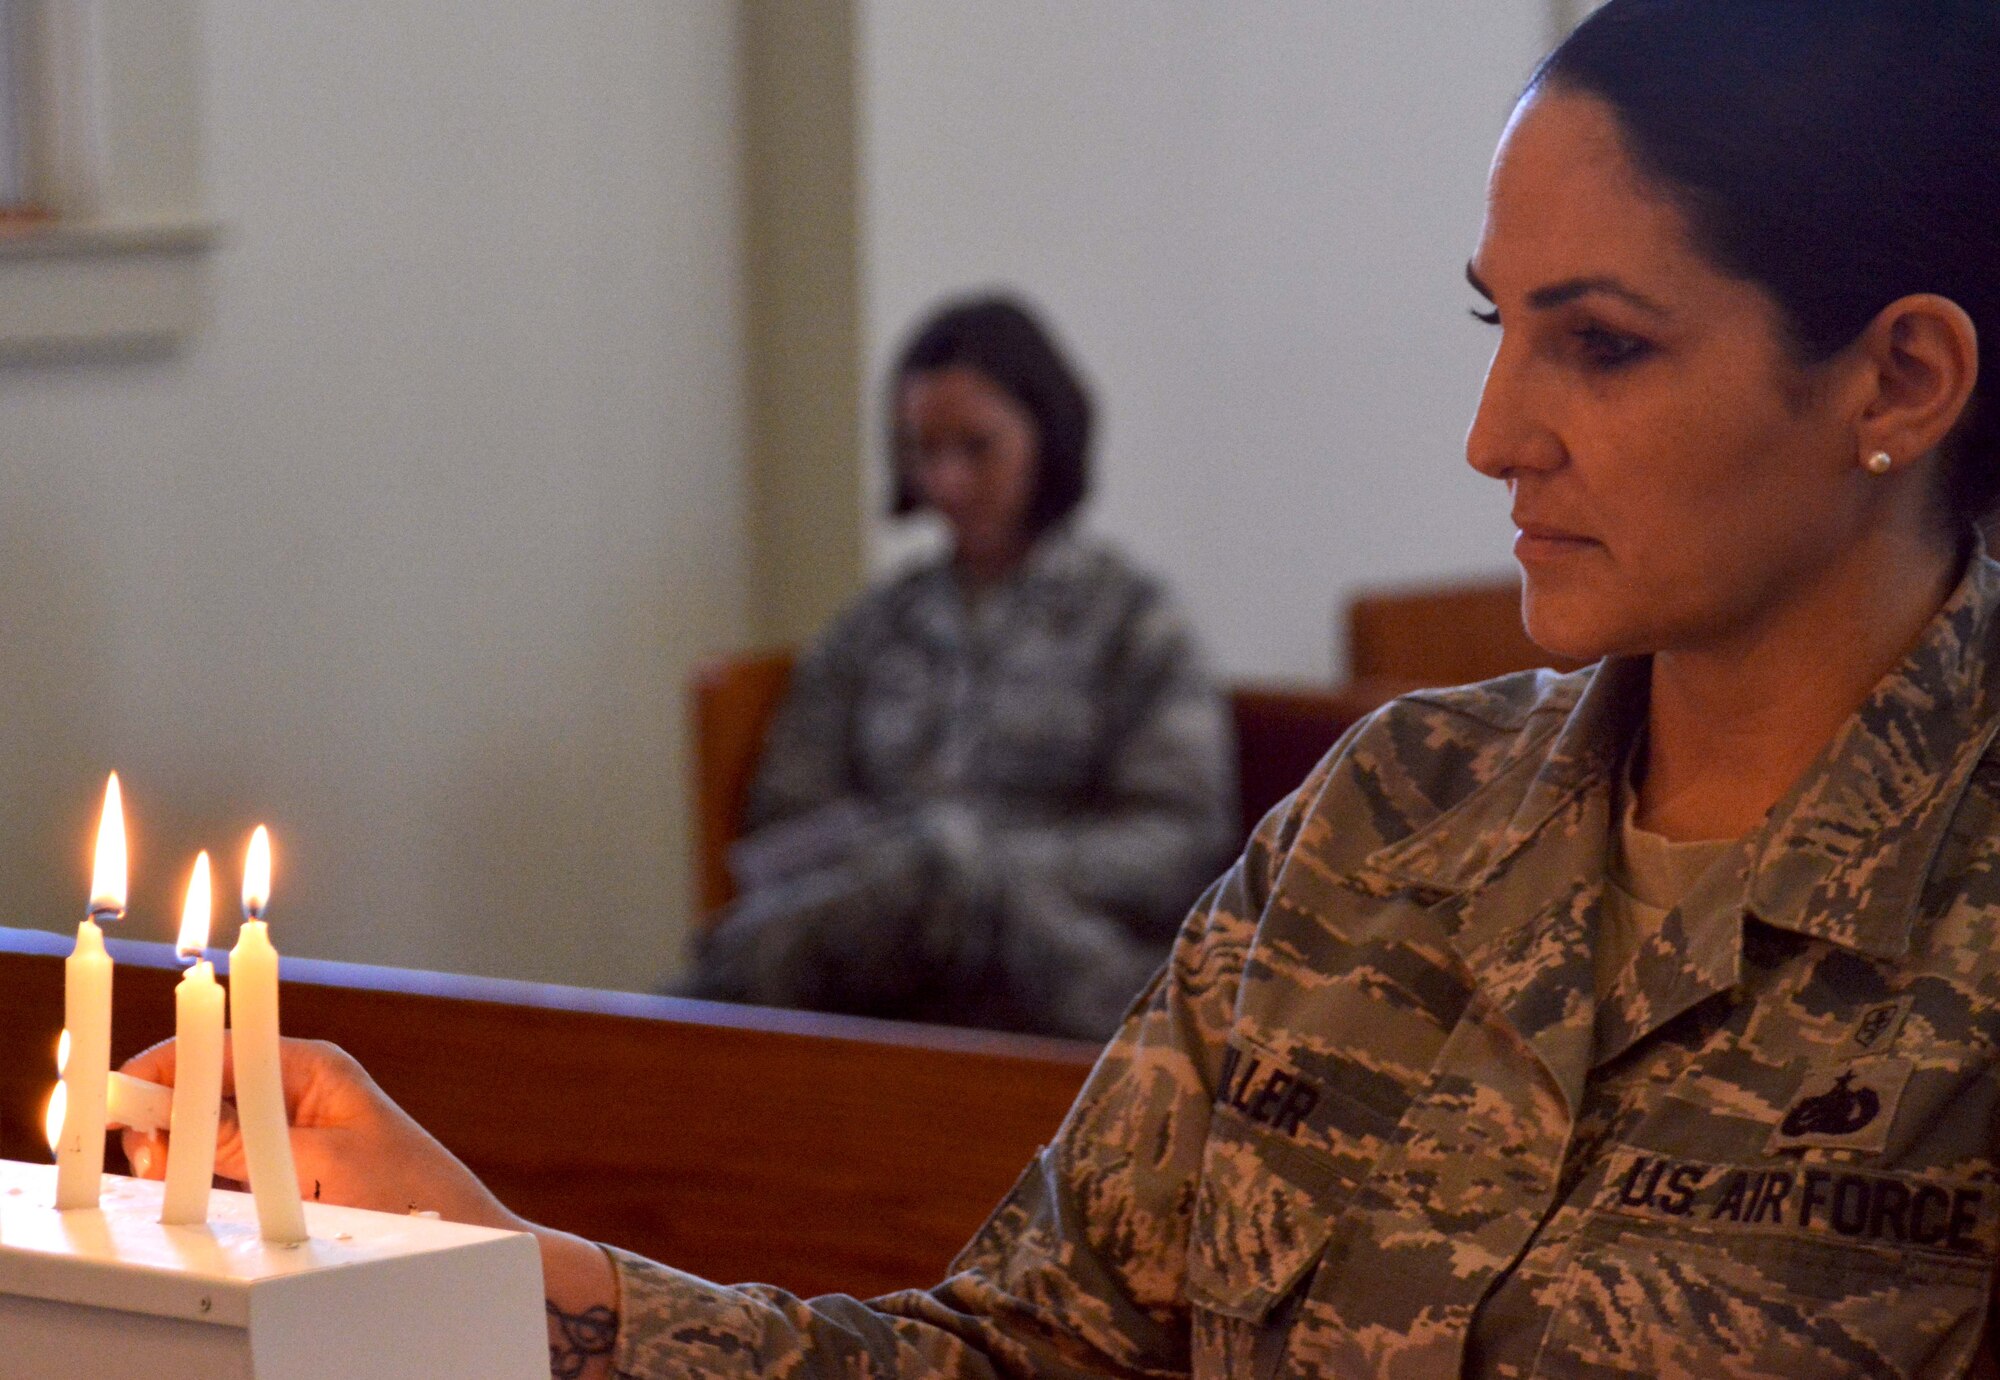 NAVAL AIR STATION FORT WORTH JOINT RESERVE BASE, Texas -- Staff Sgt. Stephanie Miller, a 301st Fighter Wing mental health technician, lights a candle during the 8th Annual Candlelight Vigil at the base chapel, April 6, 2017, in a show of support for National Crimes Victims’ Rights Week. Members of the wing participated in the vigil to help raise awareness of crime victims’ rights, while honoring them and those who advocate on their behalf. (U.S. Air Force photo by Staff Sgt. Samantha Mathison)